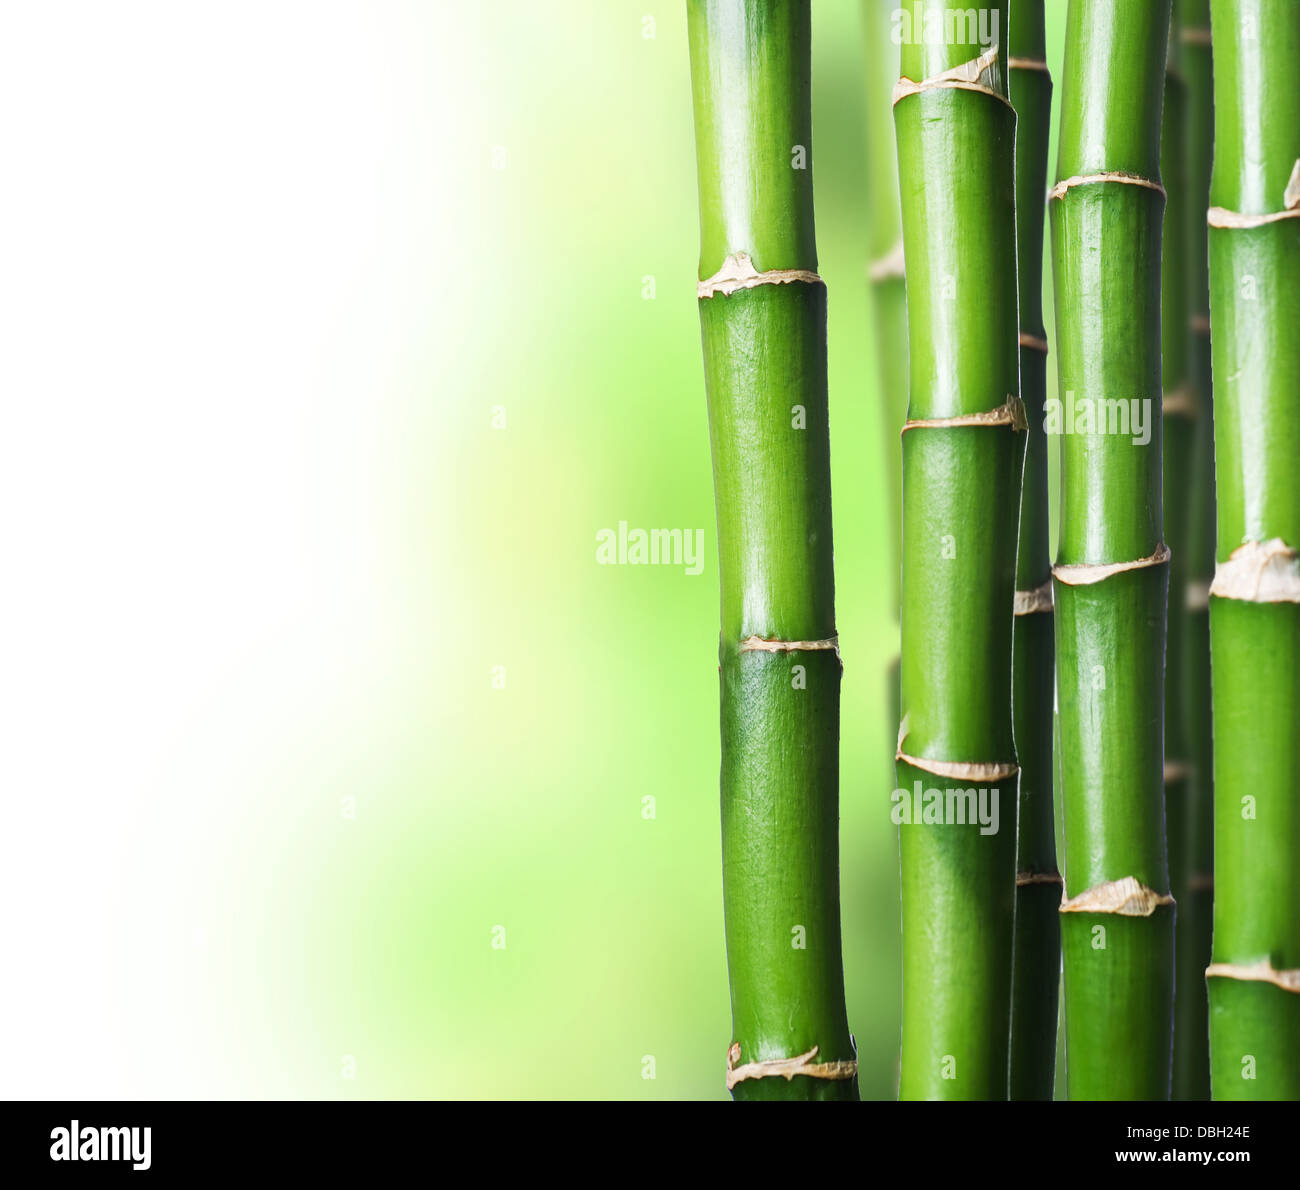 Bamboo Banque D'Images